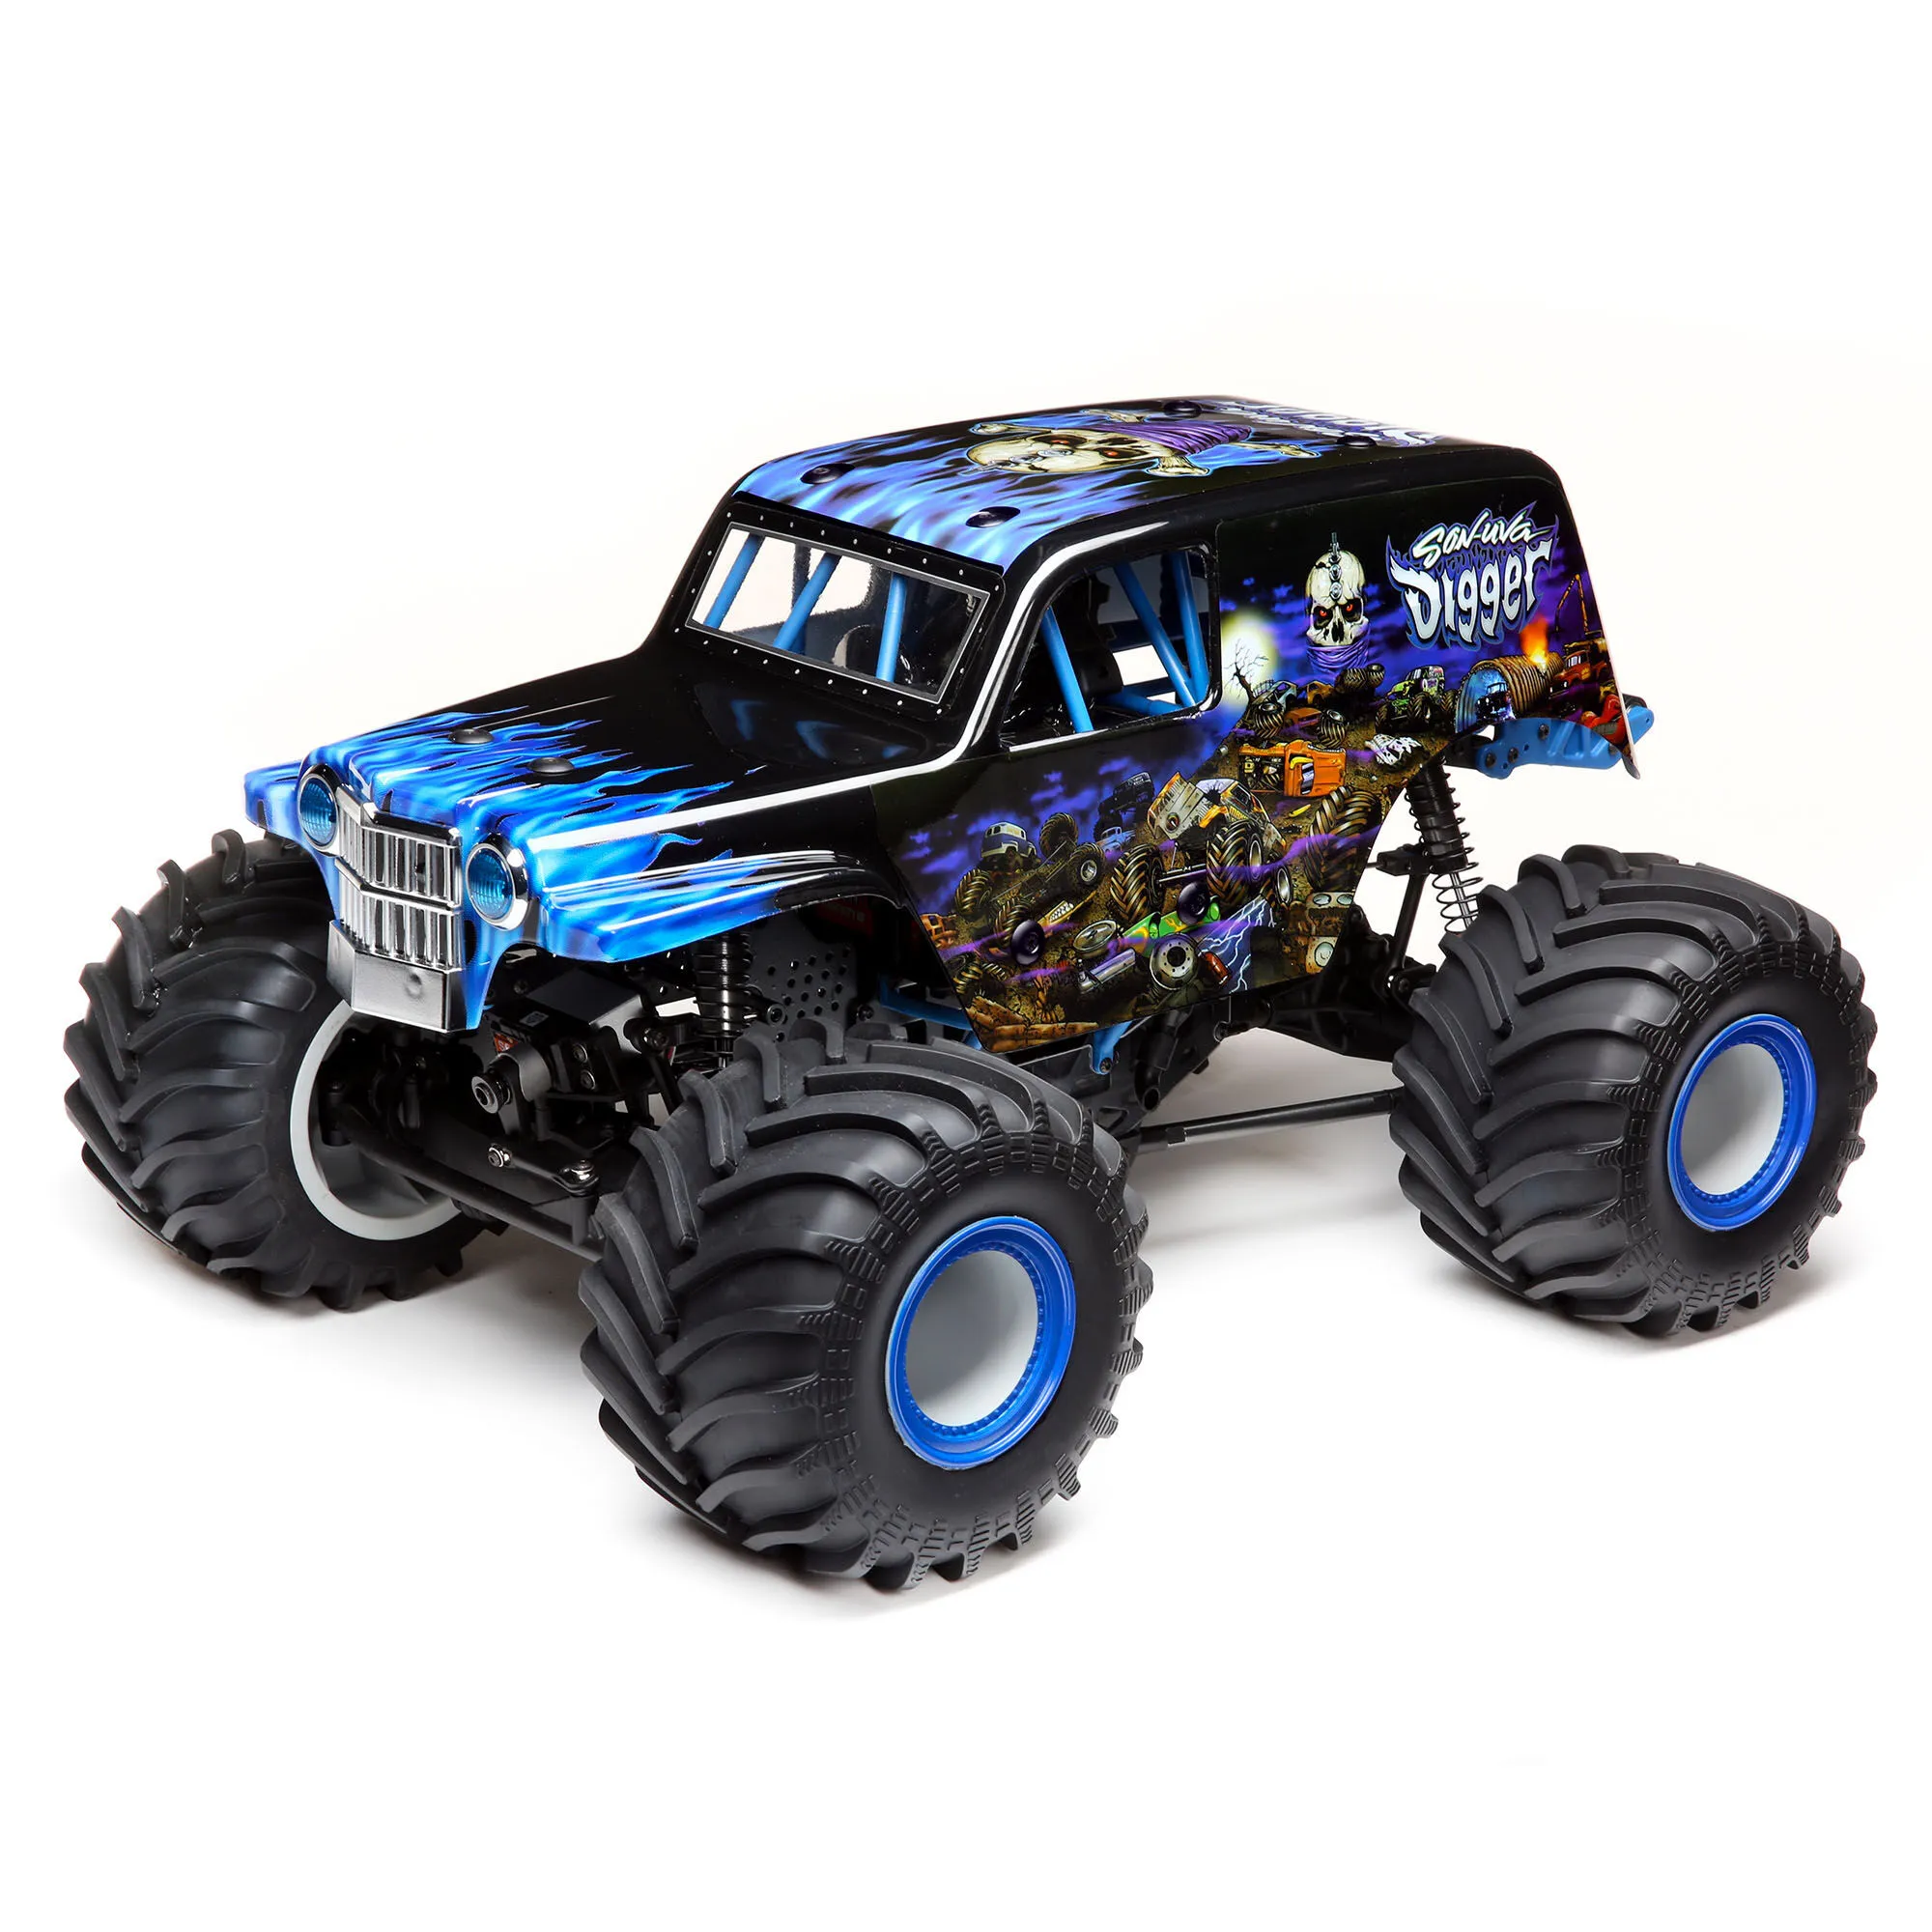 Losi LMT SonUva Digger Solid Axle Monster Truck, RTR